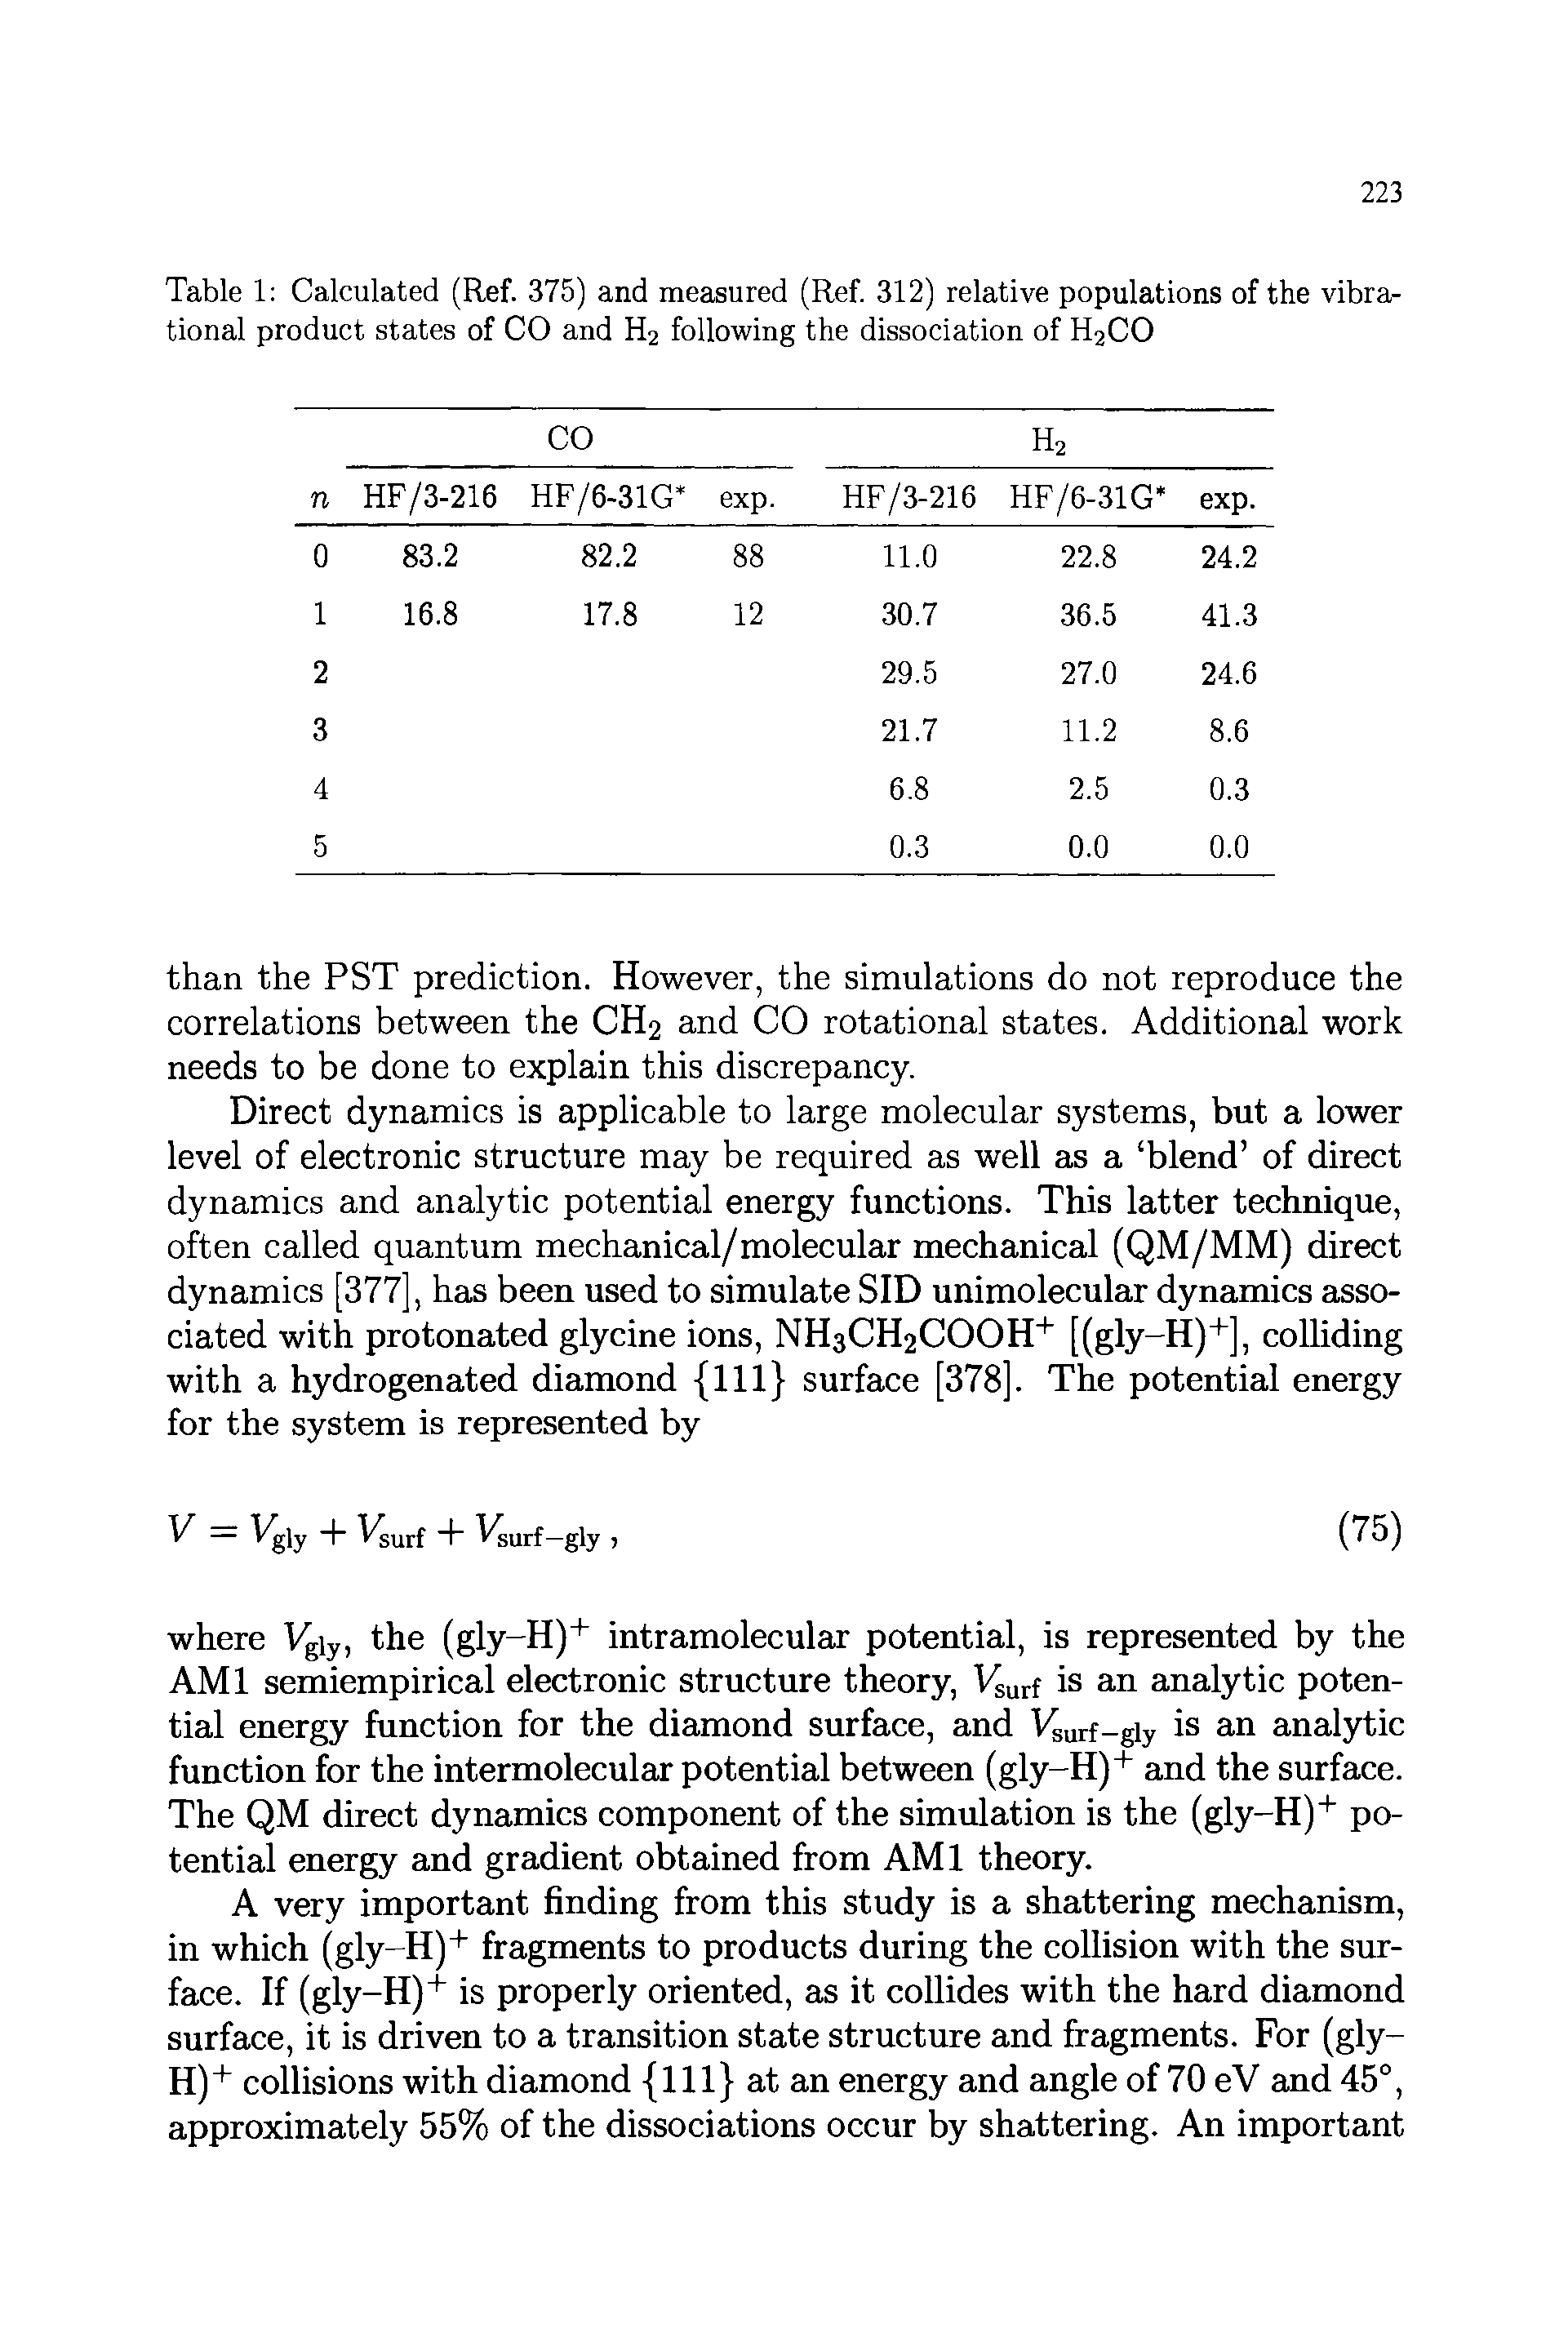 Table 1 Calculated (Ref. 375) and measured (Ref. 312) relative populations of the vibrational product states of CO and H2 following the dissociation of H2CO...